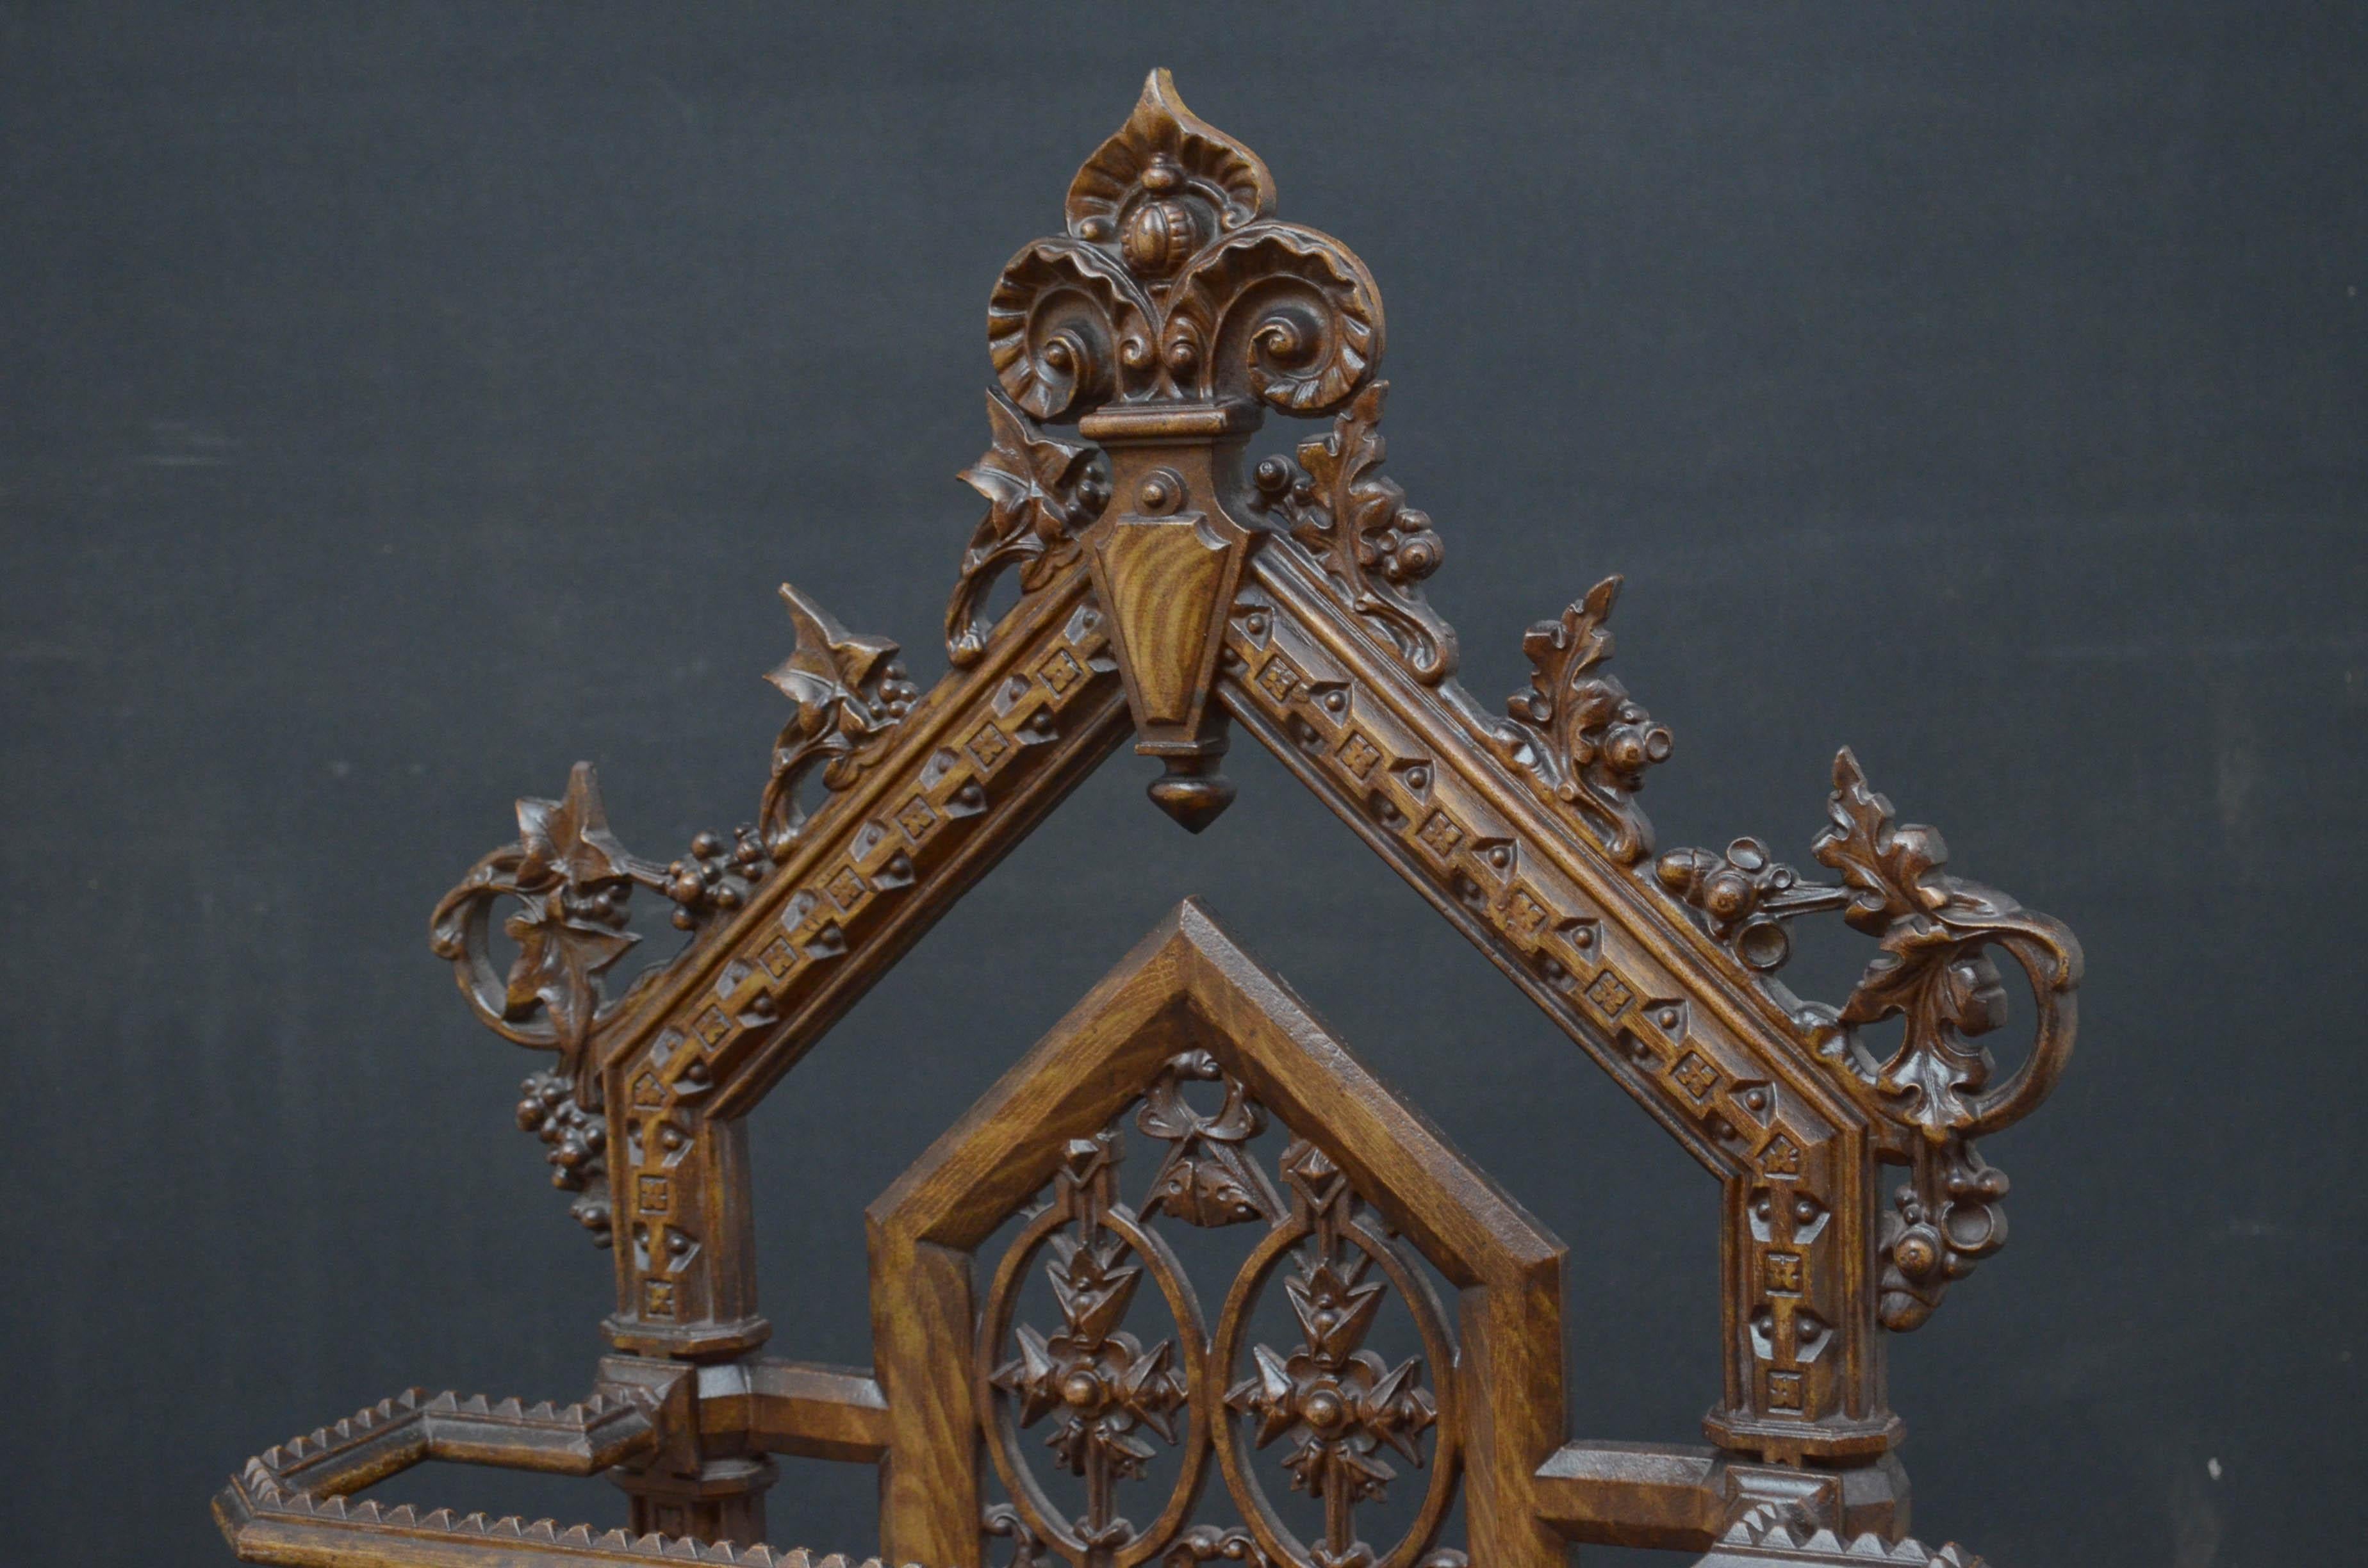 Sn4573 stylish Victorian Gothic Revival cast iron hall stand with simulated timber grain and distinctive pierced decoration of stylized plant forms, Gothic and geometrical elements combined in a manner typical of Dresser’s work. All in excellent